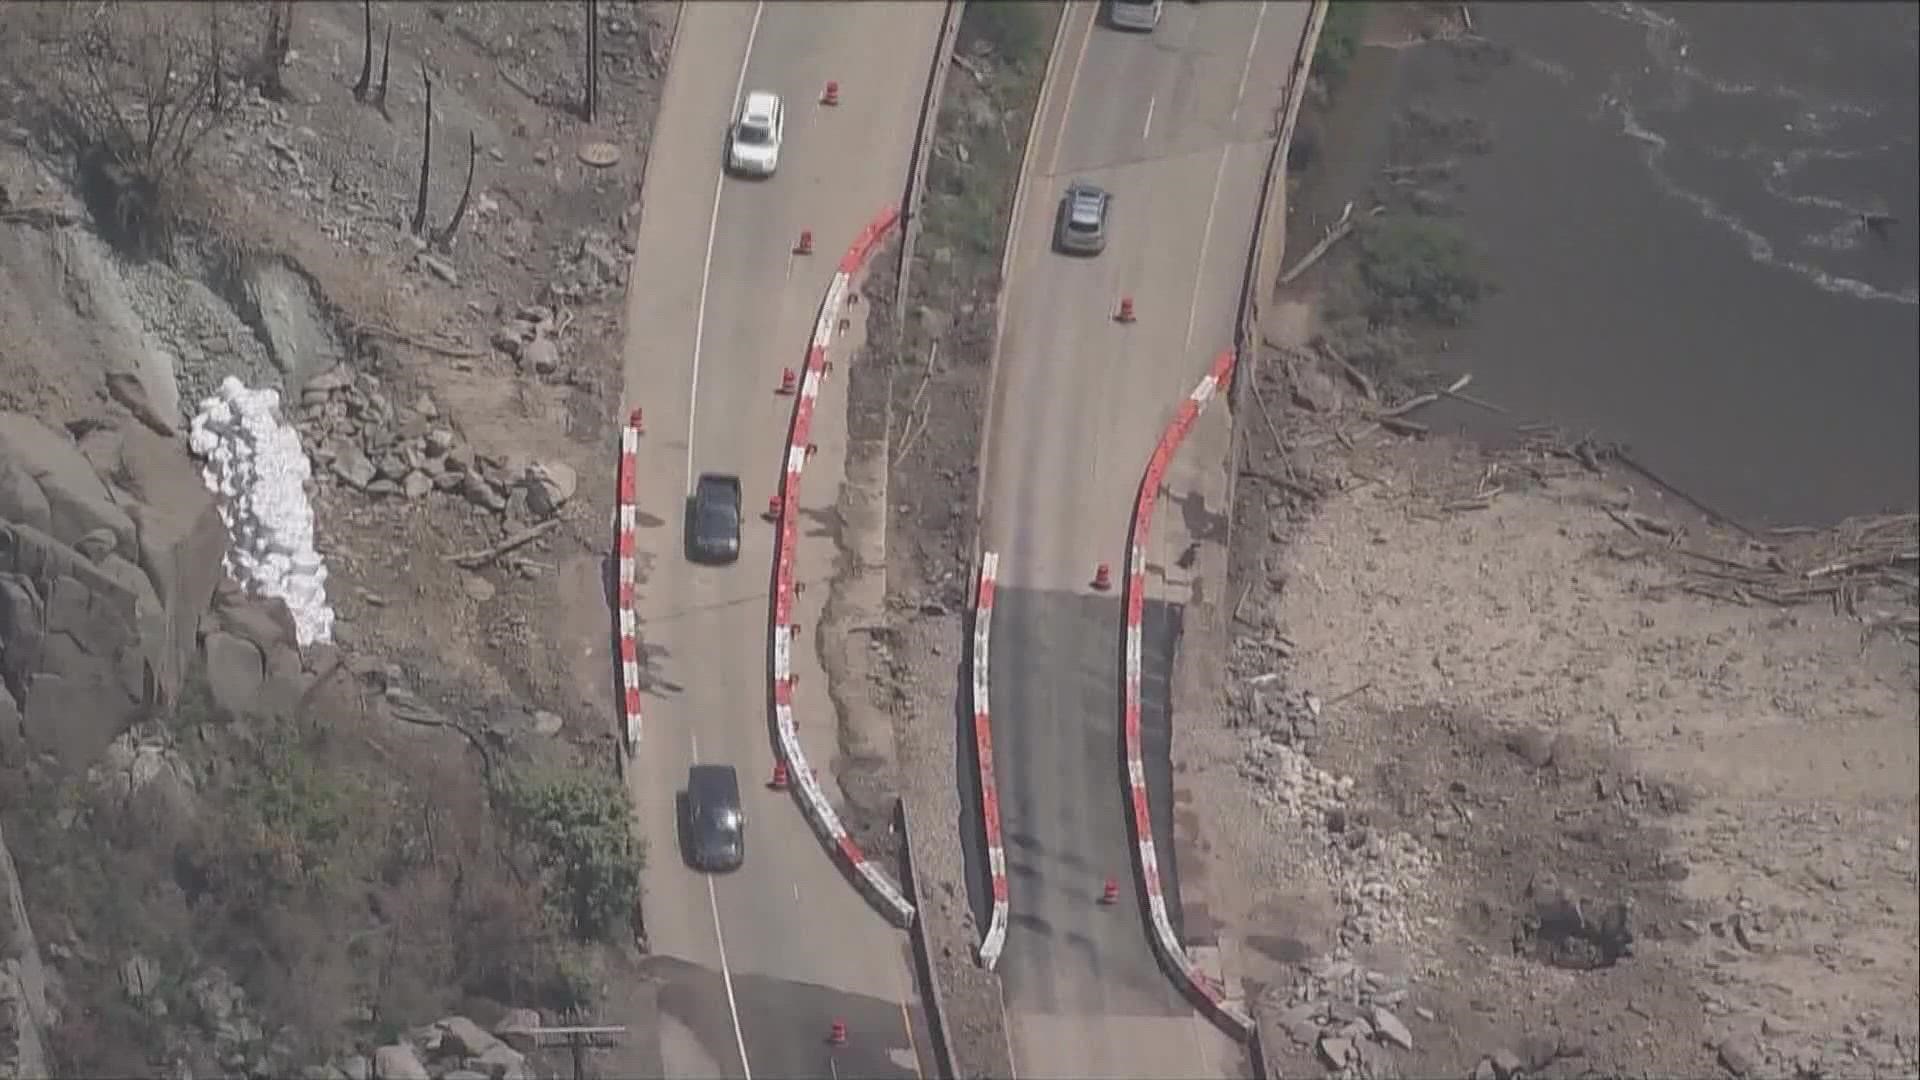 CDOT plans to discuss preparations to protect Interstate 70 and other infrastructure in Glenwood Canyon this spring and summer.